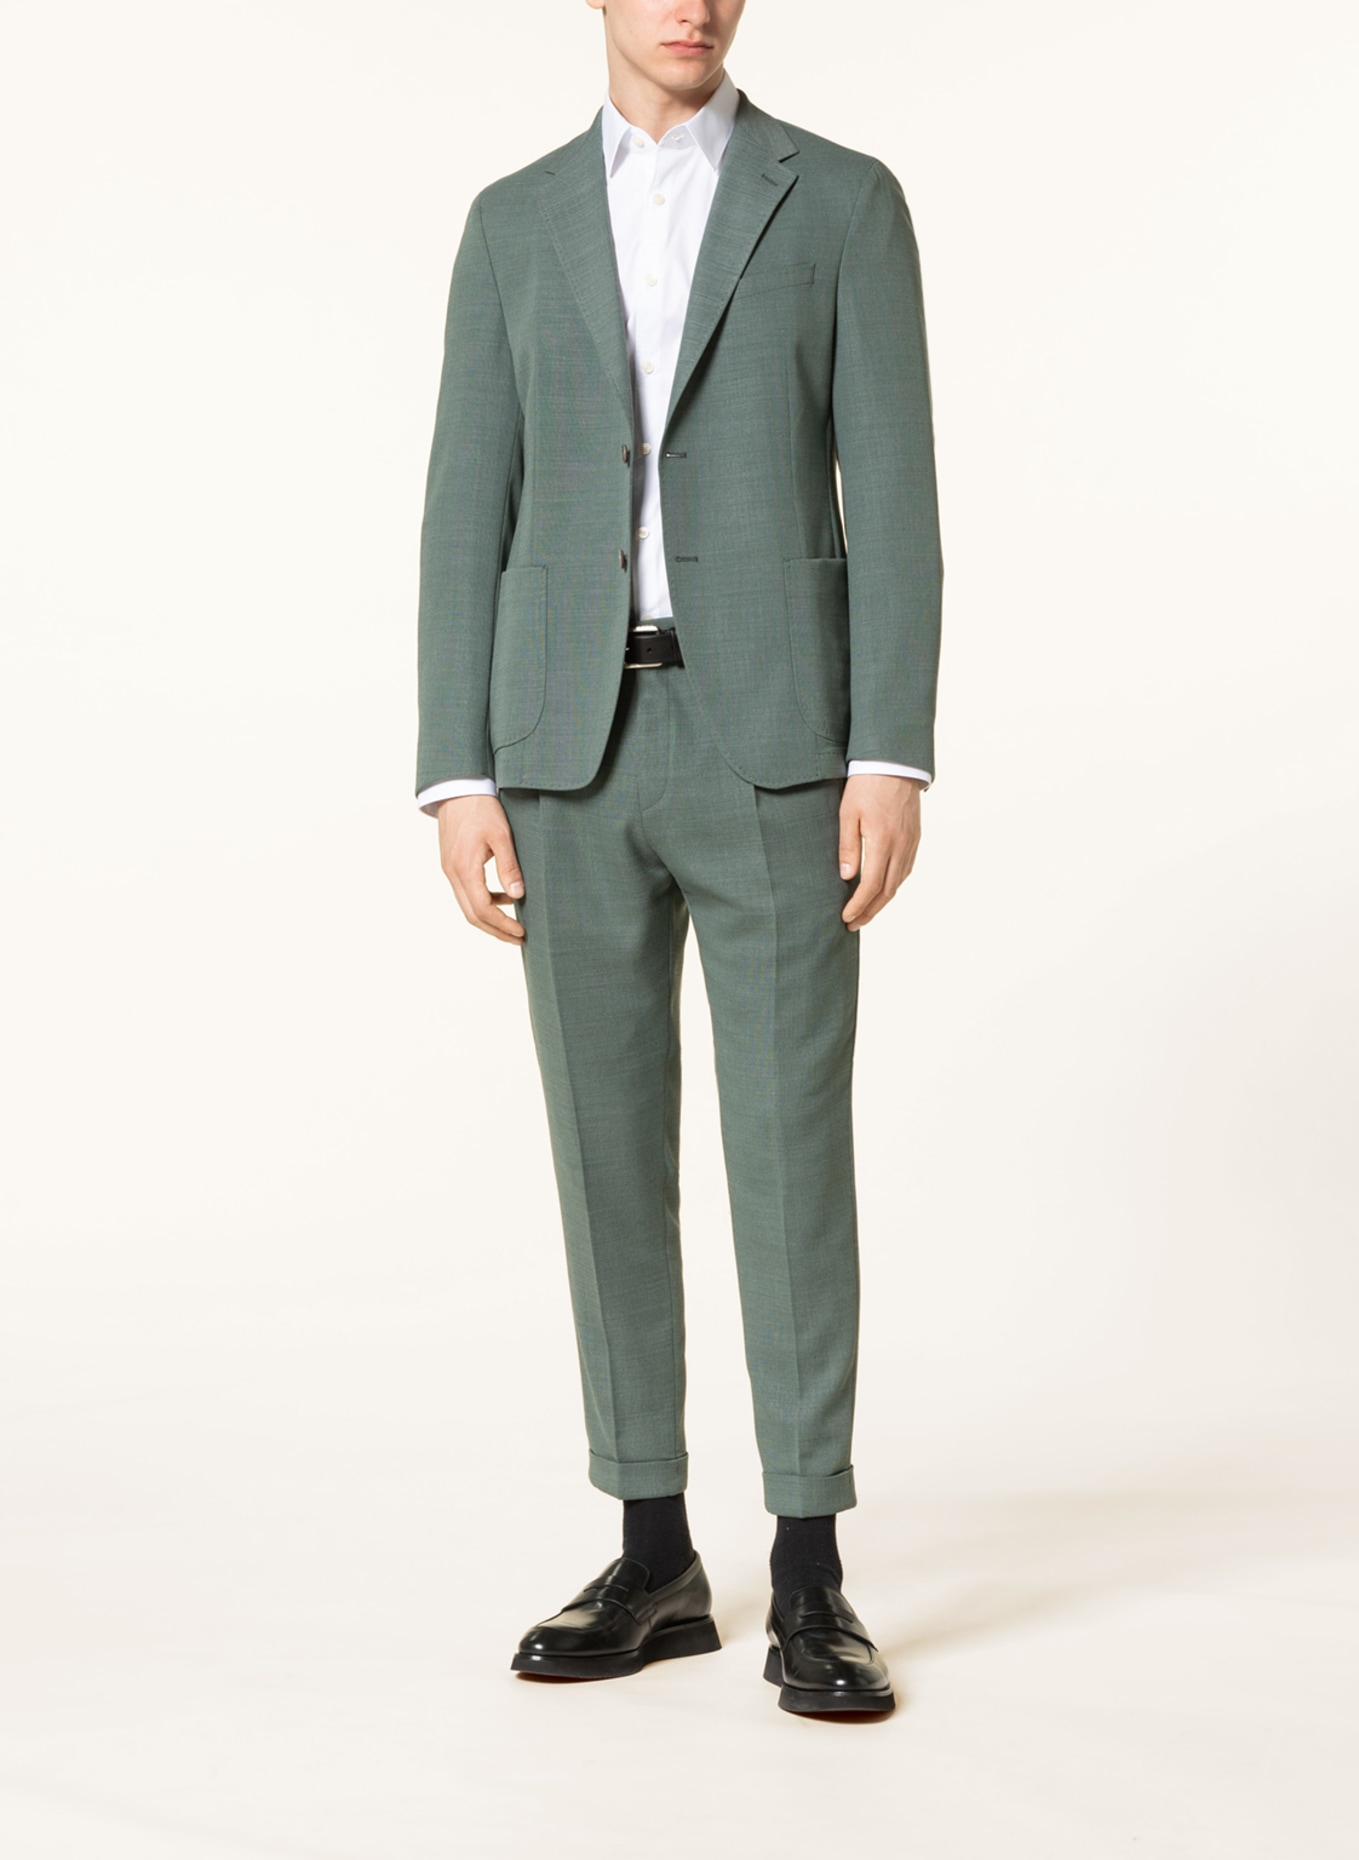 STRELLSON Suit pants LUIS relaxed fit, Color: 310 Medium Green               310 (Image 5)